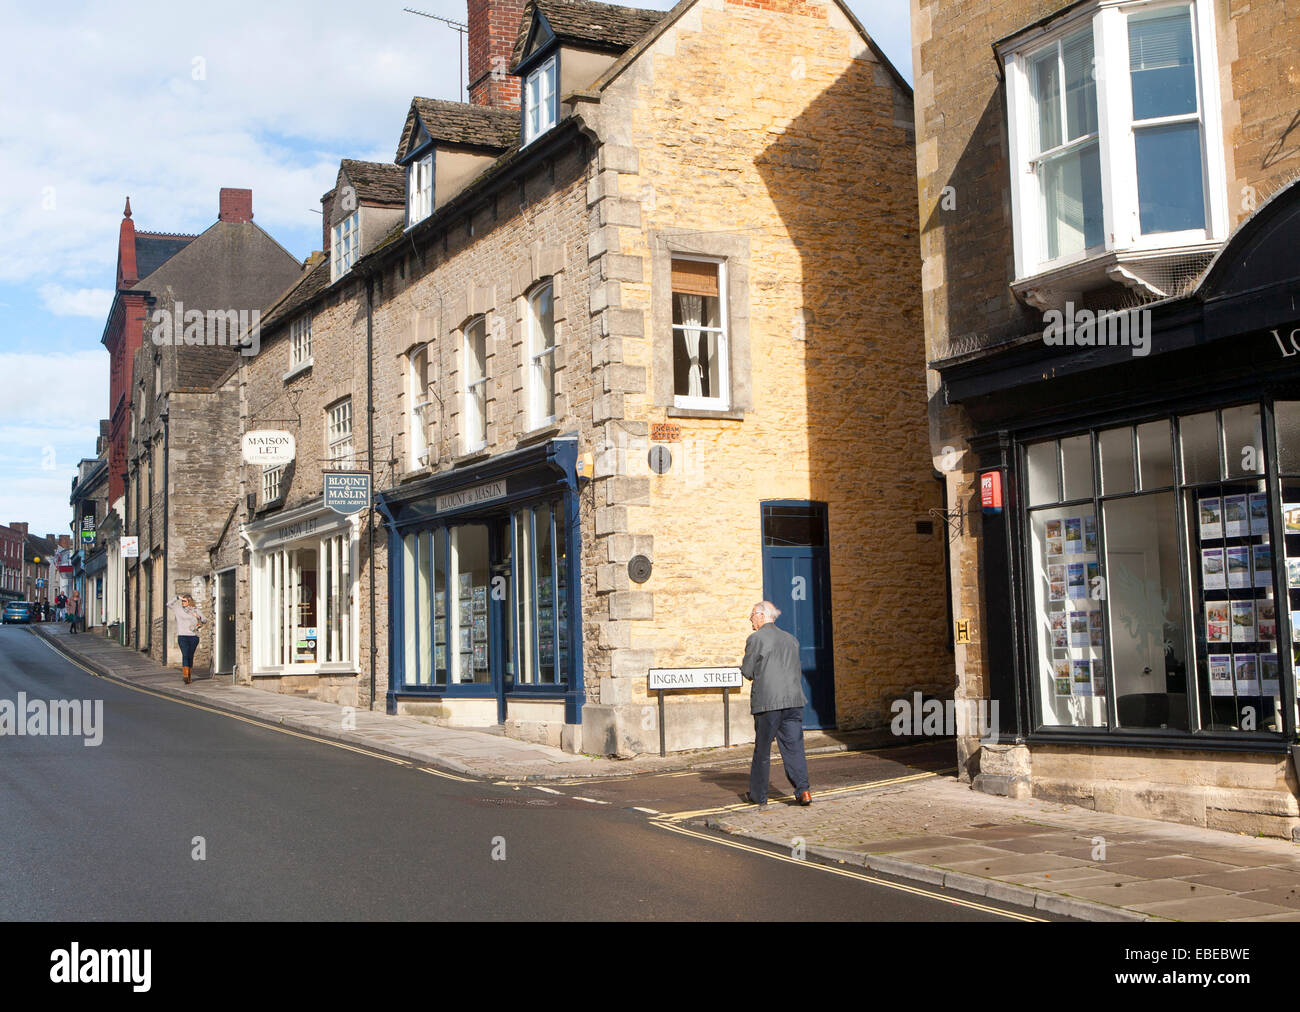 Shops and homes in historic buildings, Malmesbury, Wiltshire England, UK Stock Photo